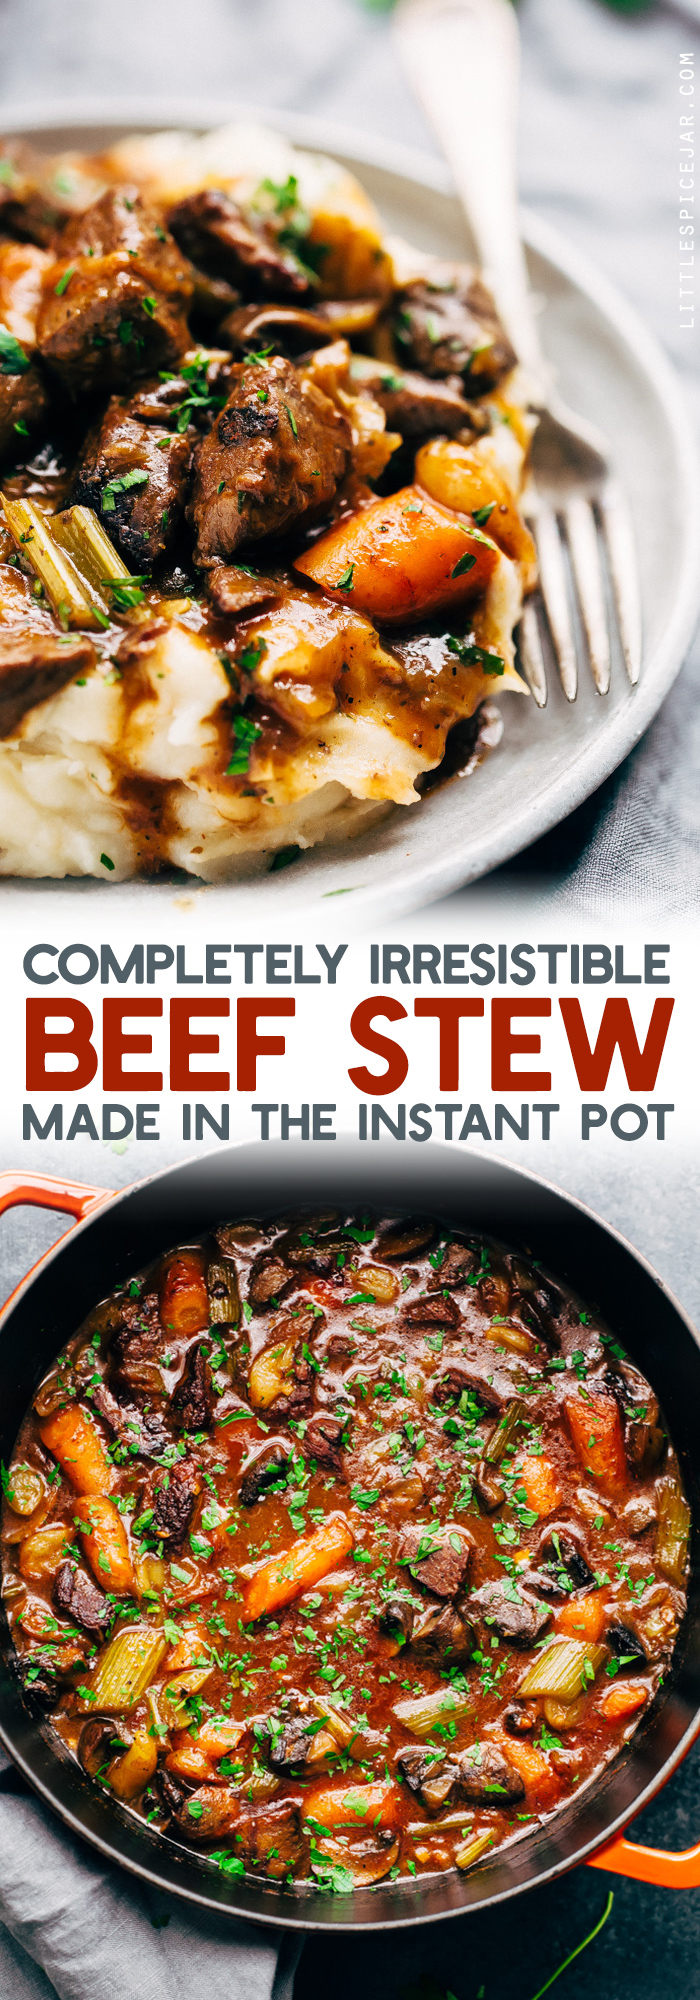 Irresistible Instant Pot Beef Stew - This recipe is a quick dump and go method that makes homemade beef stew in the ballpark of 45 minutes. Serve over a bed of mashed potatoes or with hot crusty bread. #beefstew #instapotbeefstew #beefstewrecipe | Littlespicejar.com